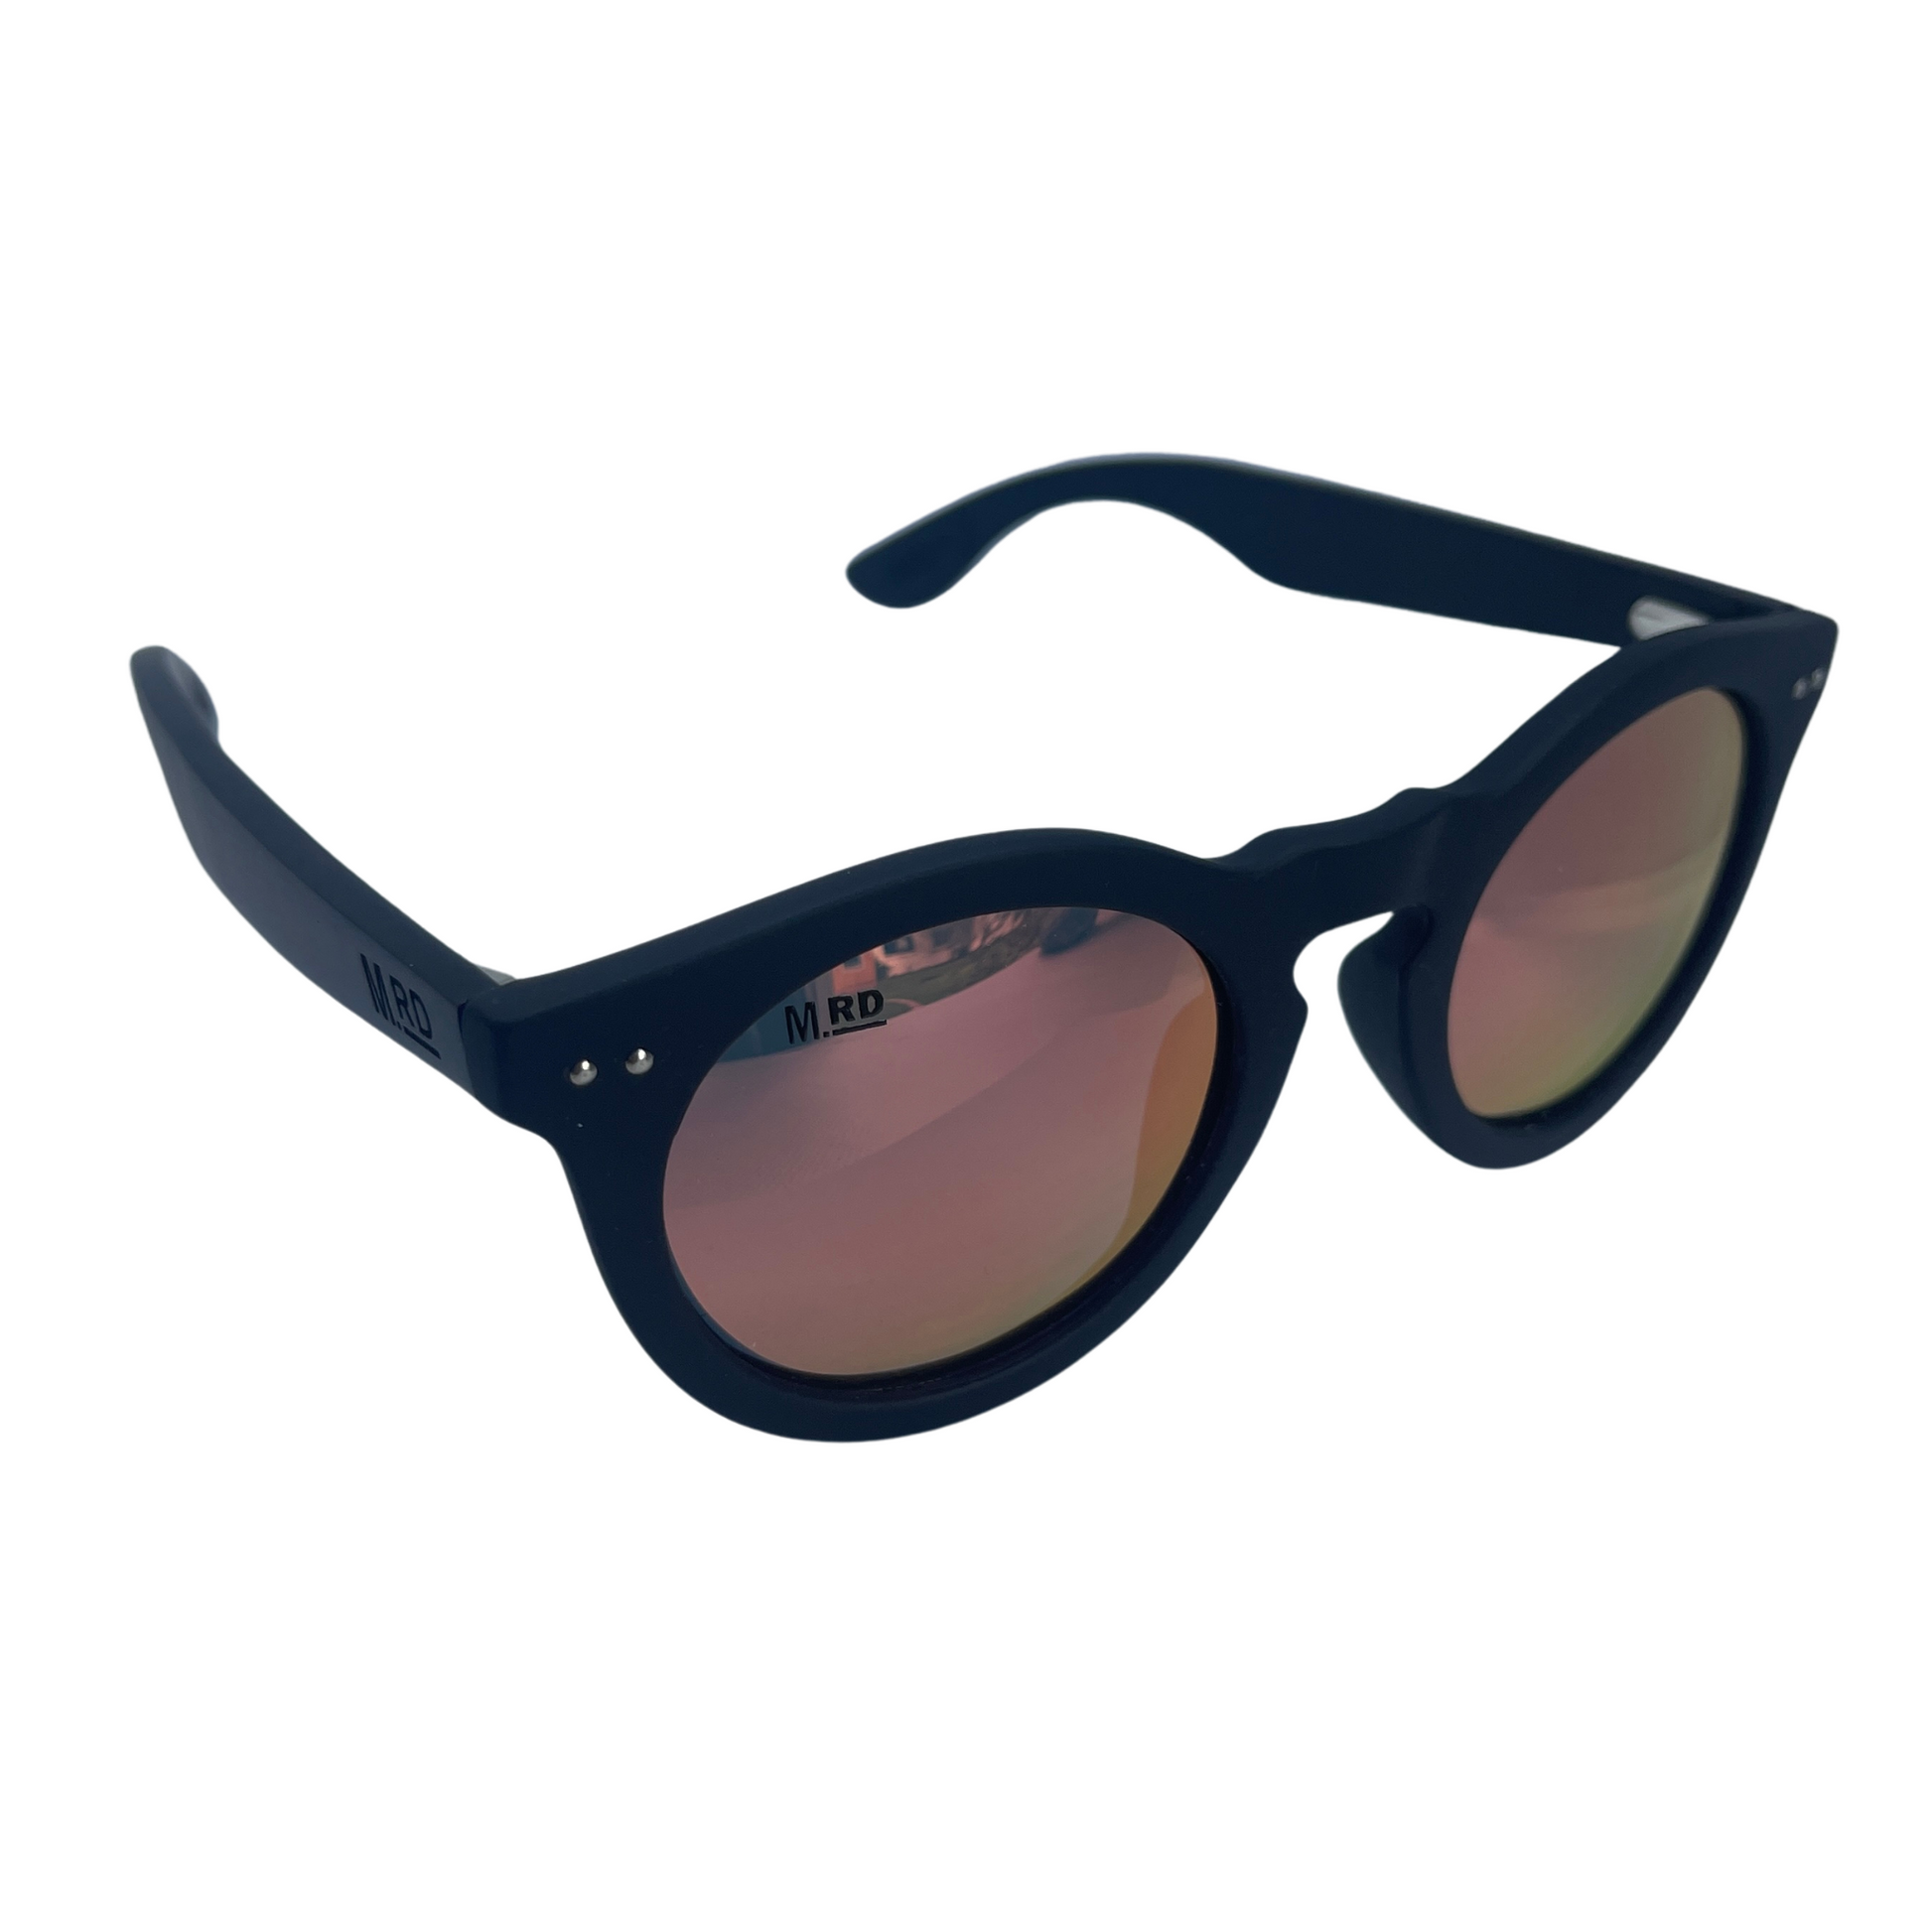 Womens black frame sunglasses with pink reflective lens in a Grace Kelly style.